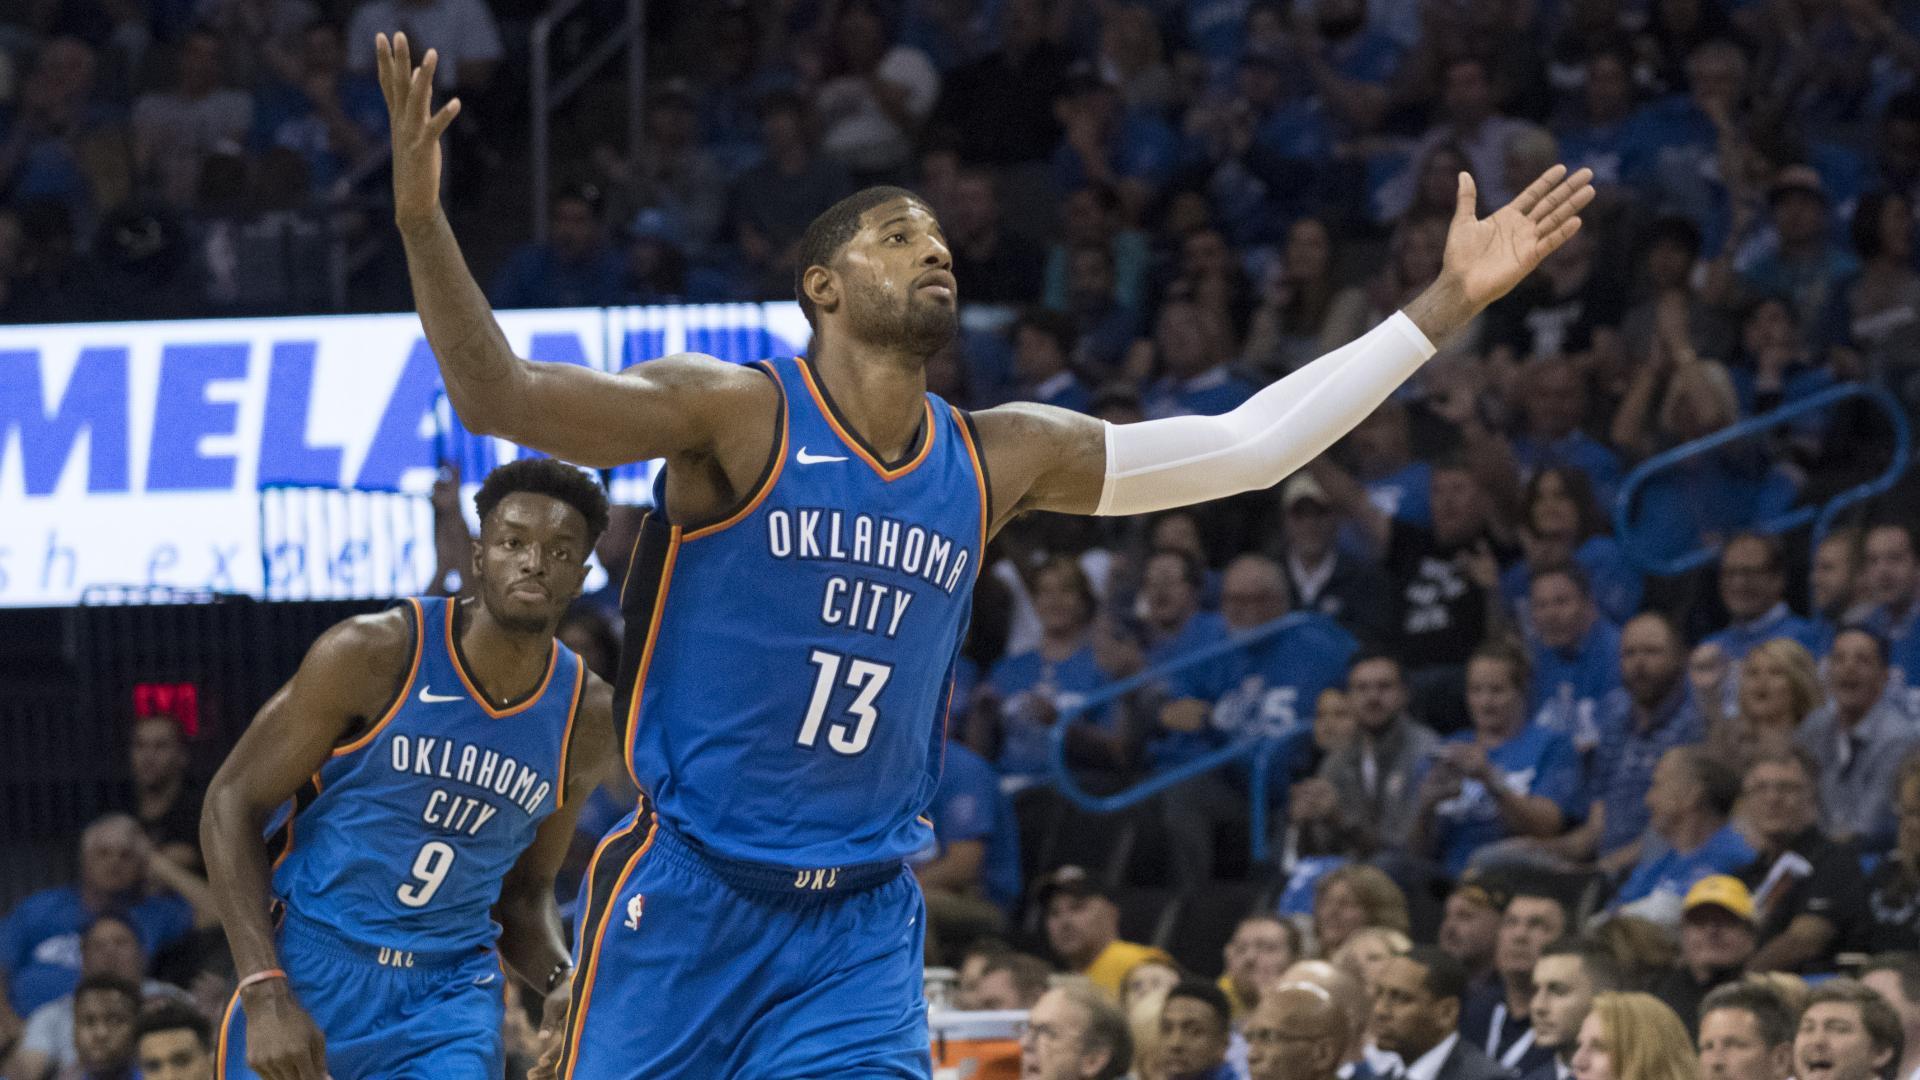 Thunder news: Paul George says it's good for OKC to struggle early